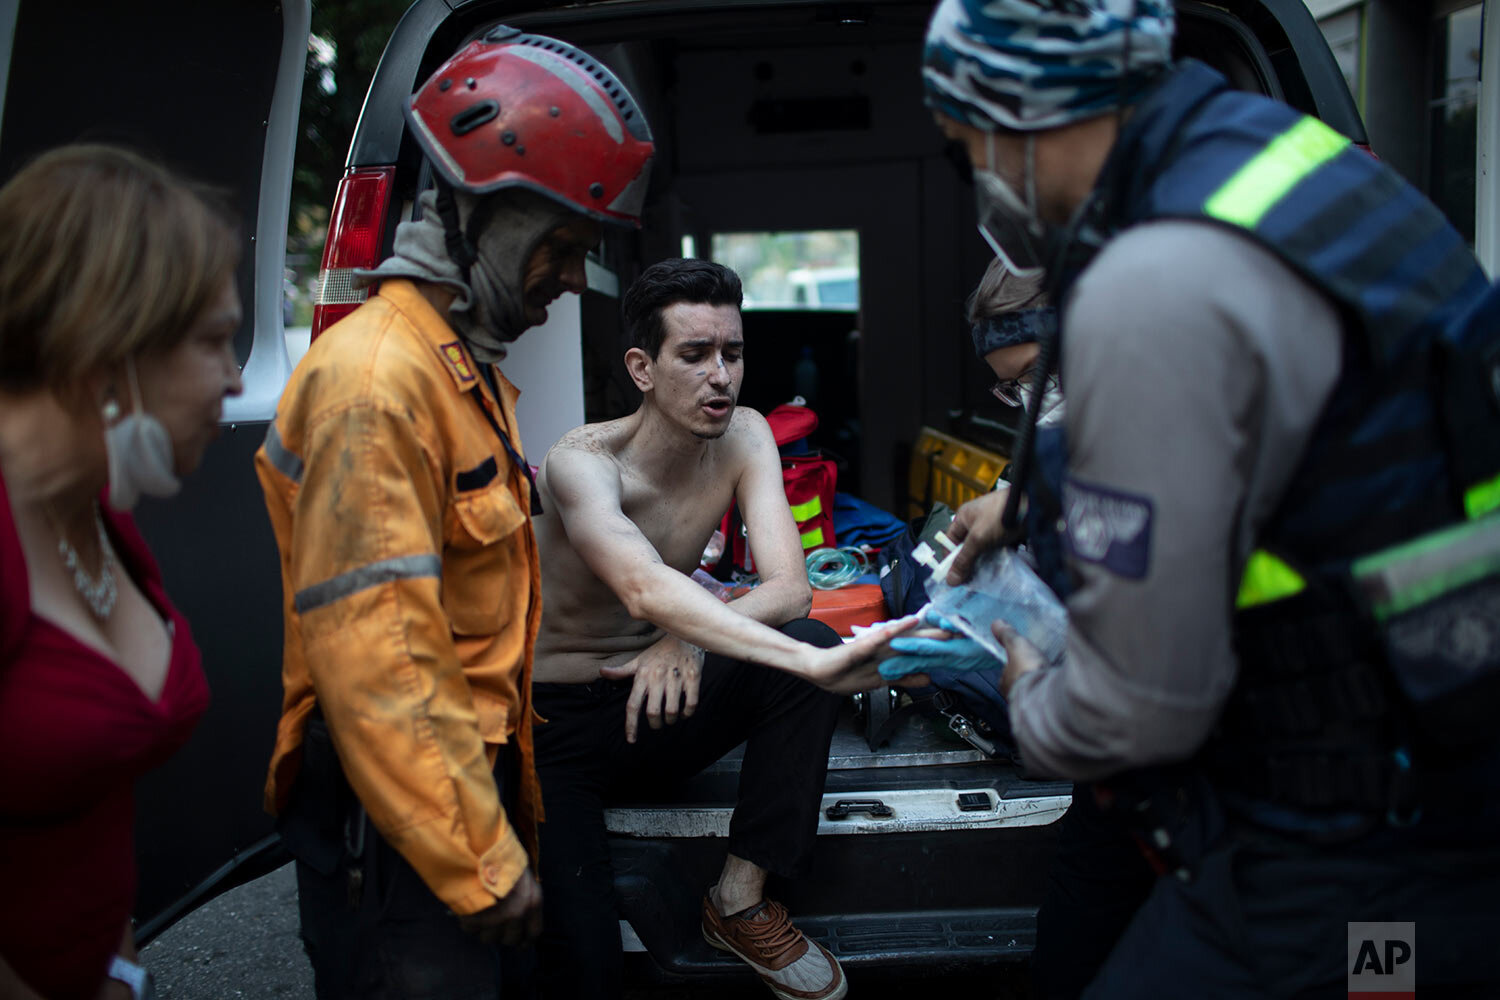  Angels of the Road volunteer paramedics tend to a man's injuries after his car caught fire at a parking lot in Caracas, Venezuela, Monday, Feb. 8, 2021. (AP Photo/Ariana Cubillos) 